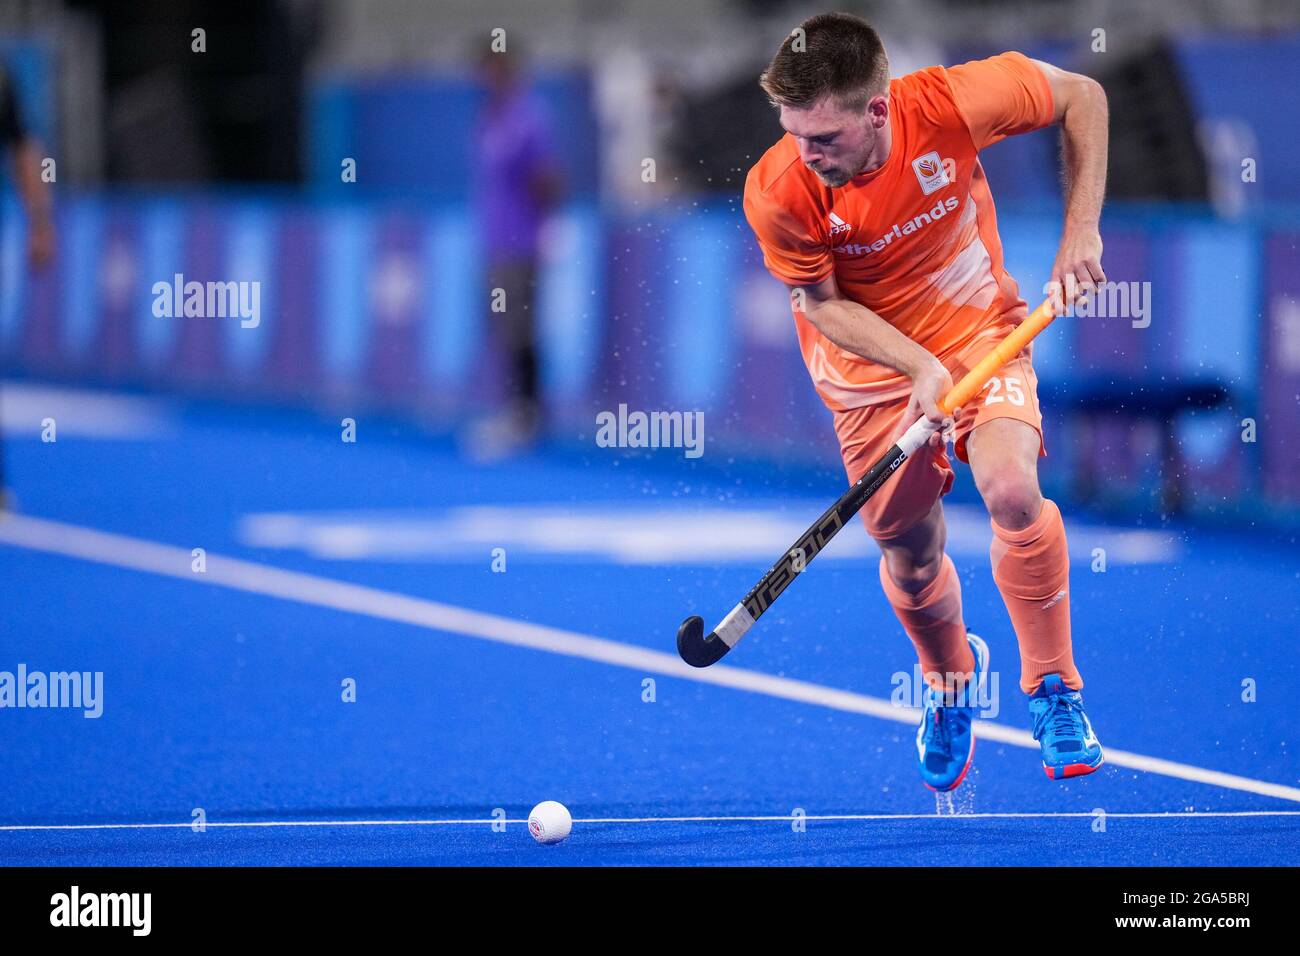 TOKYO, JAPAN - JULY 27: Thierry Brinkman of the Netherlands competing on Men's Pool B during the Tokyo 2020 Olympic Games at the Oi Hockey Stadium on July 27, 2021 in Tokyo, Japan (Photo by Yannick Verhoeven/Orange Pictures) NOCNSF Stock Photo